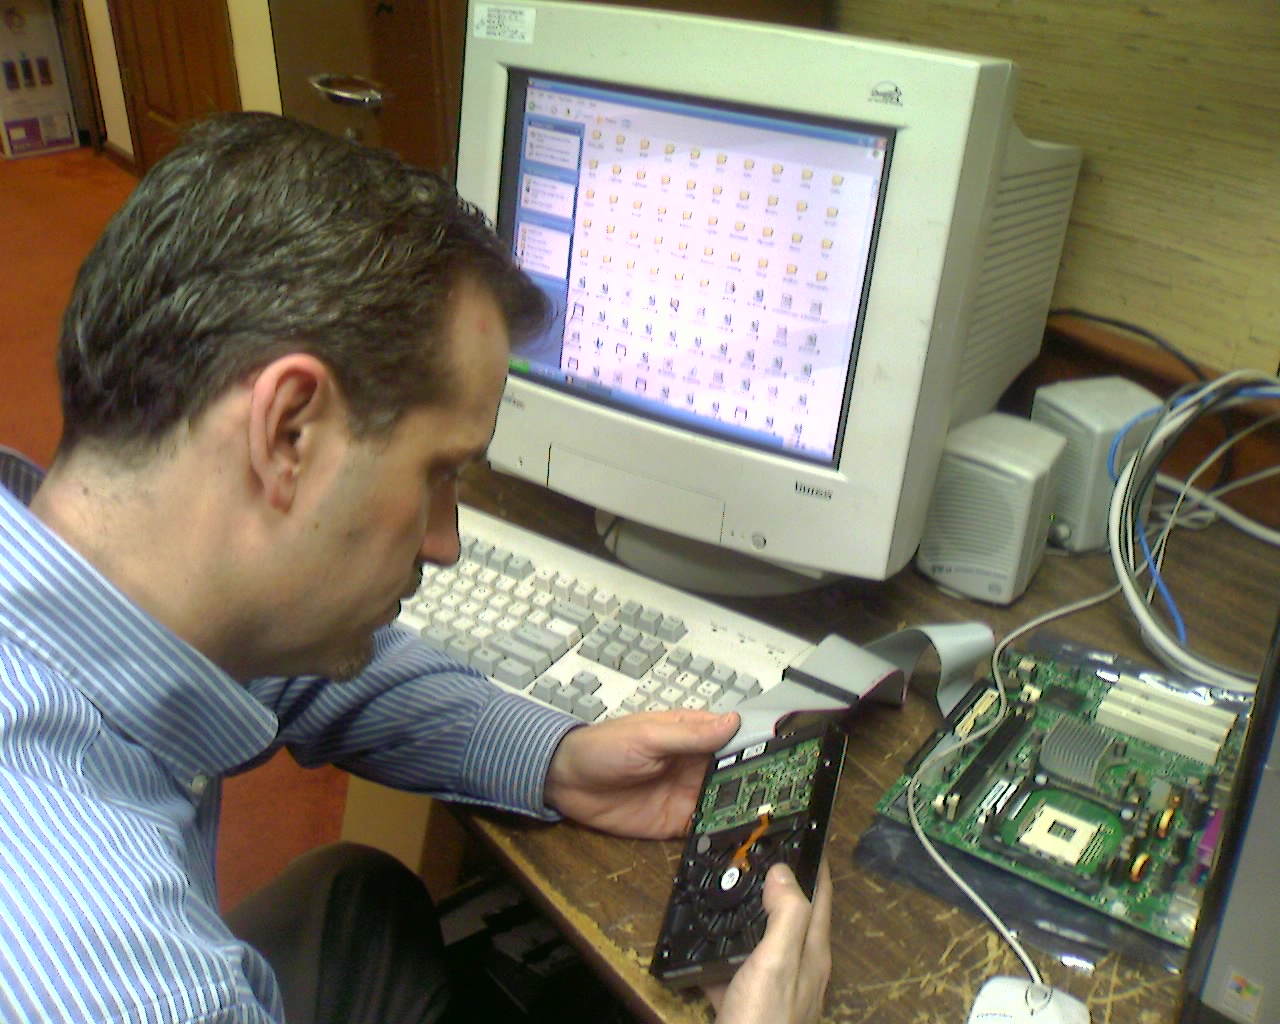 Experienced & Knowledgeable PC Computer Repair Techs